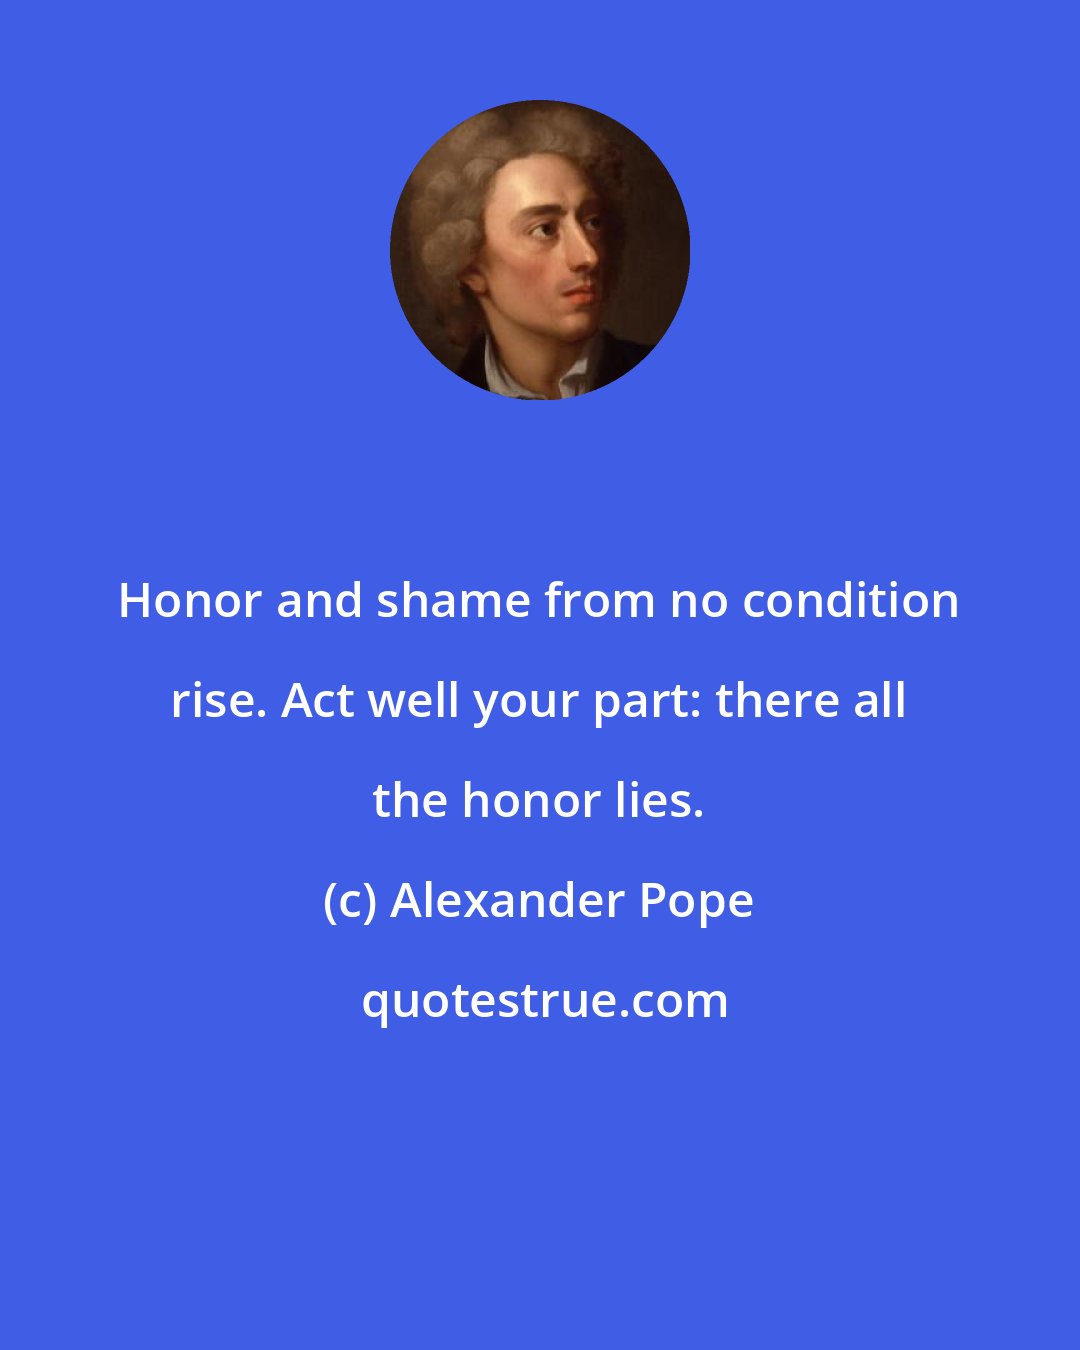 Alexander Pope: Honor and shame from no condition rise. Act well your part: there all the honor lies.